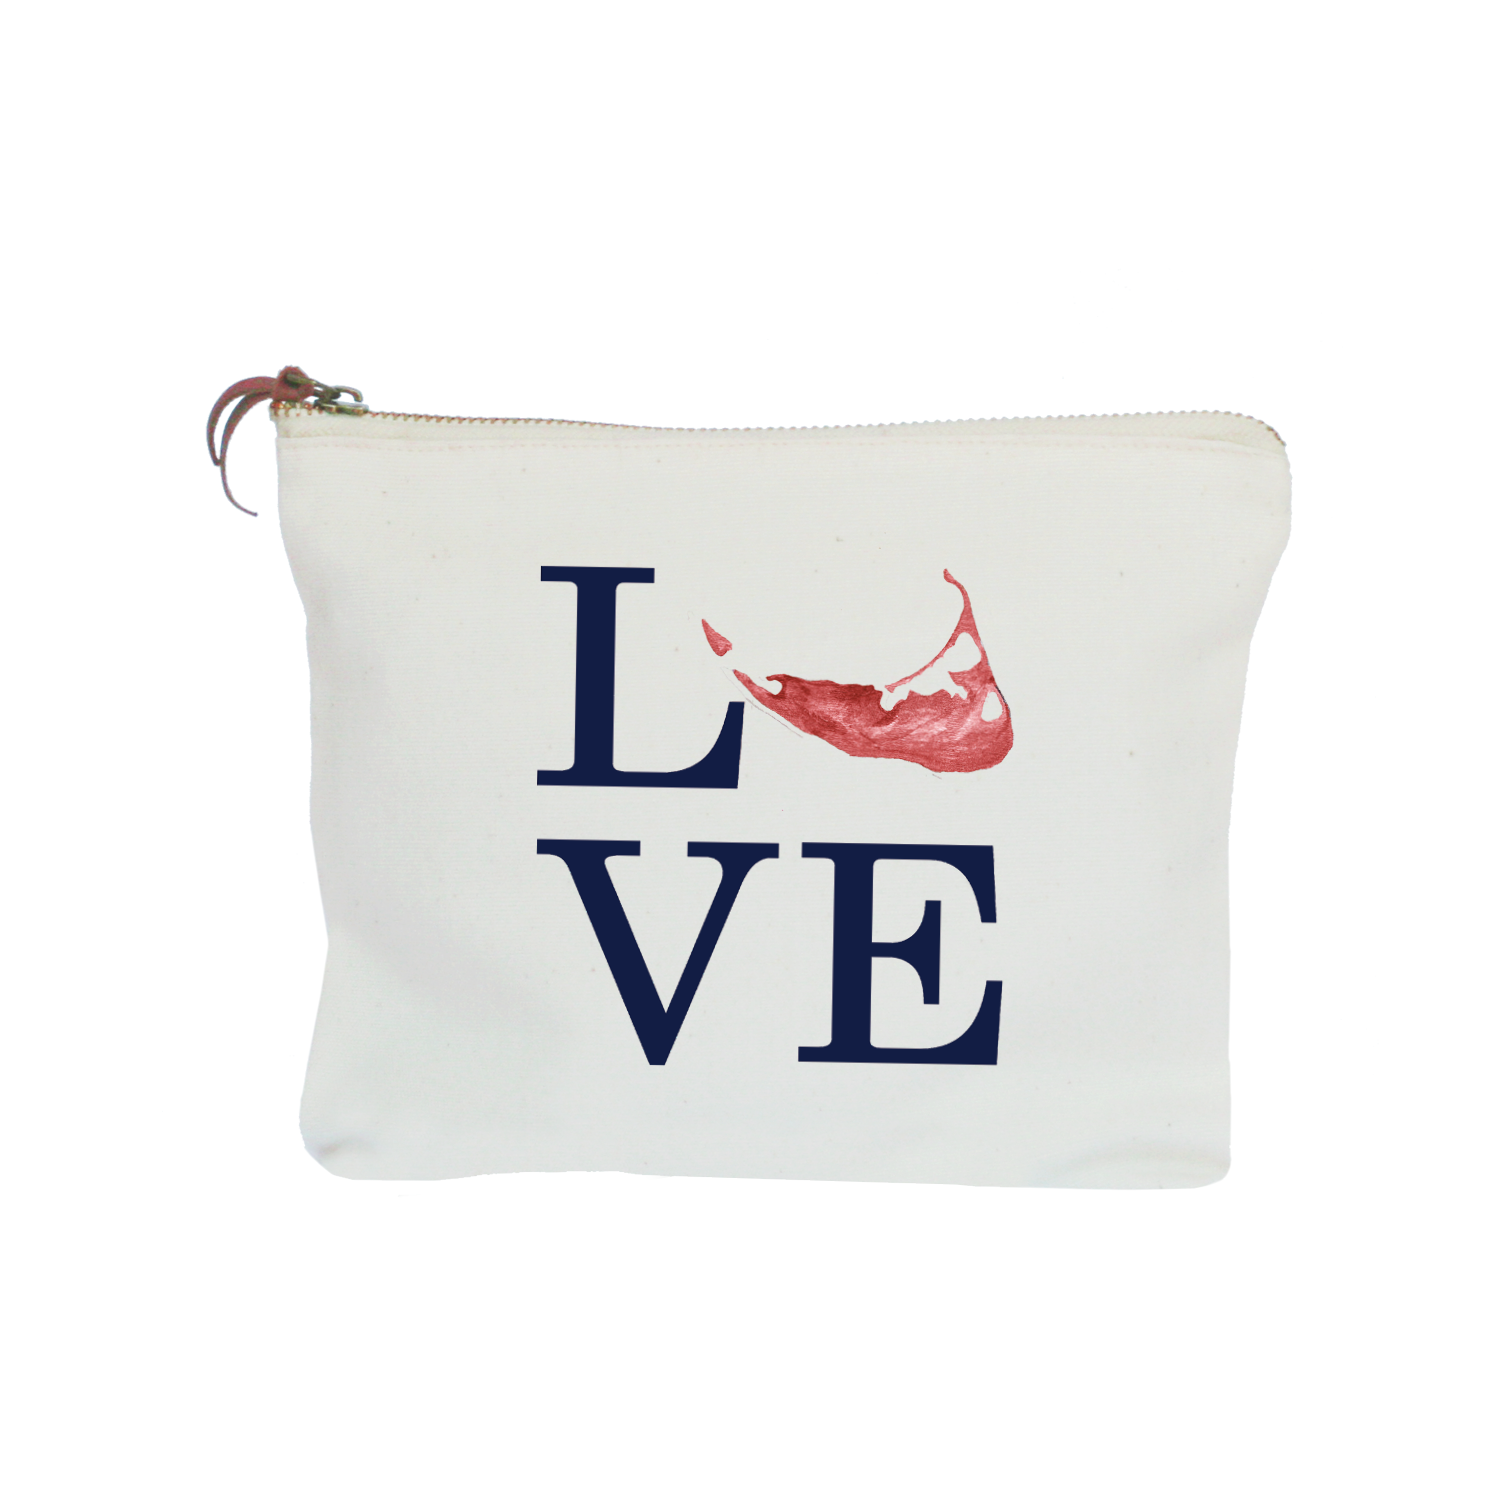 love nantucket island navy text with red island zipper pouch